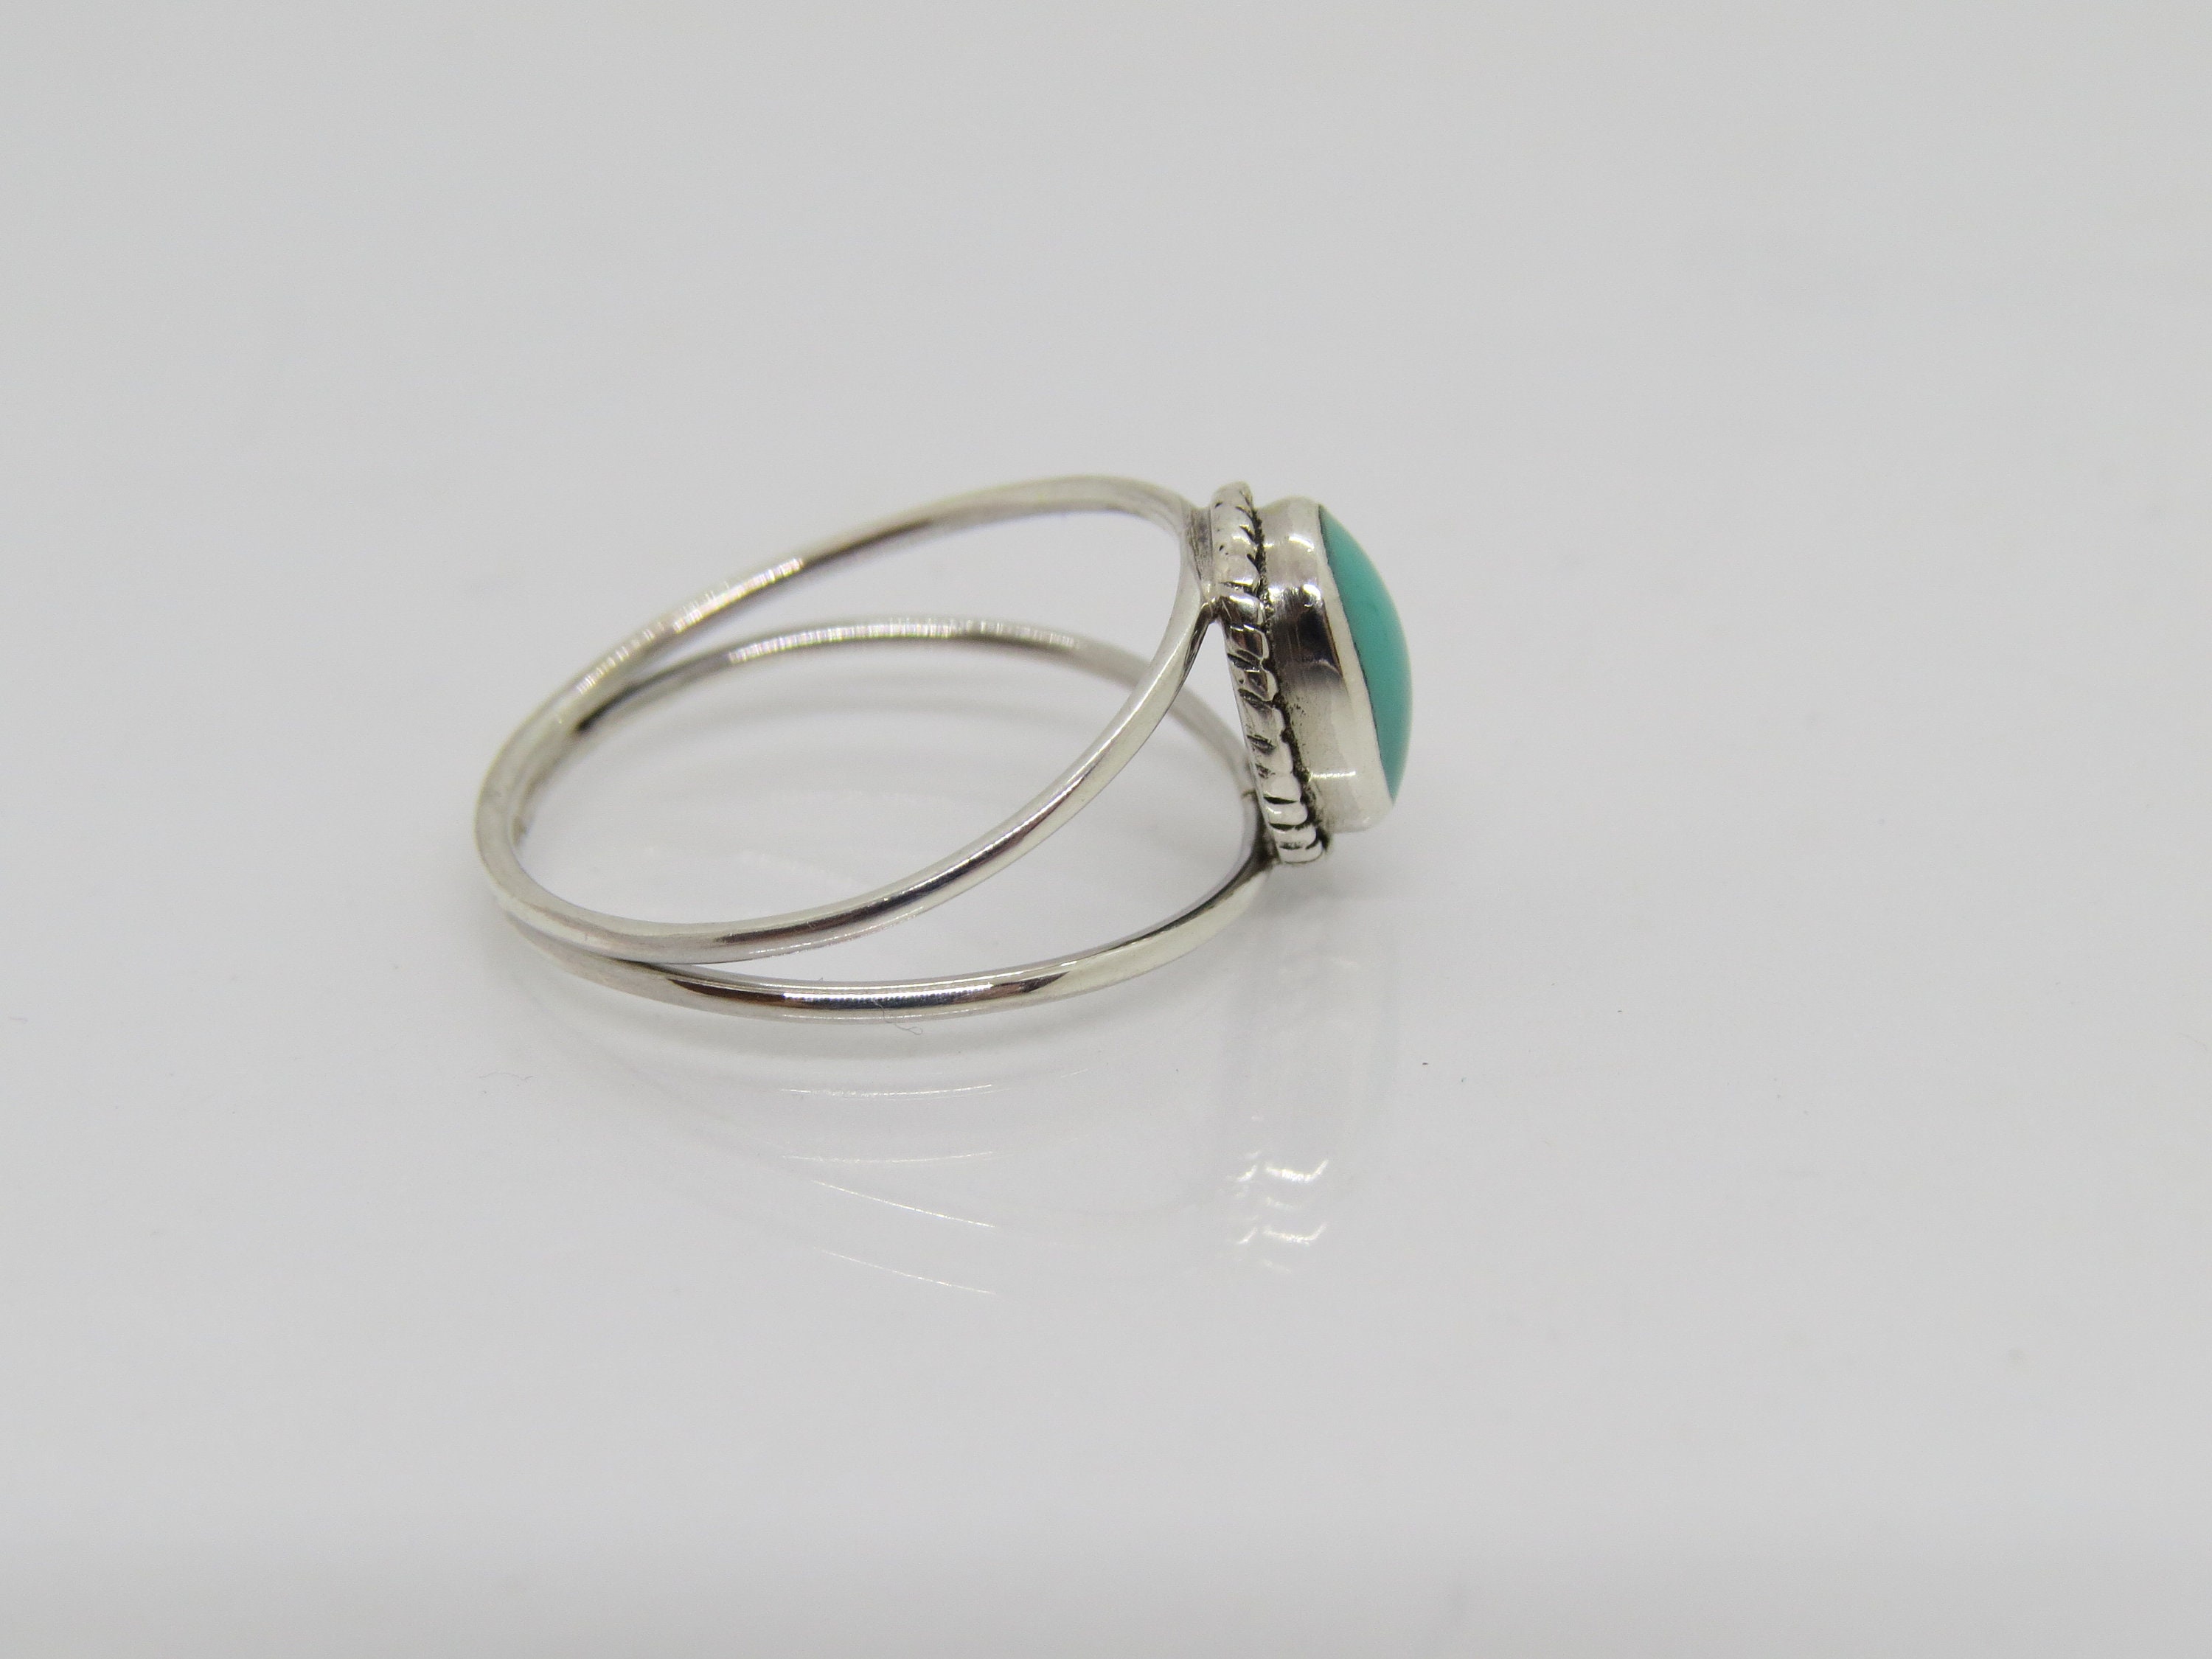 Vintage Sterling Silver Turquoise Ring Size 7 - Etsy